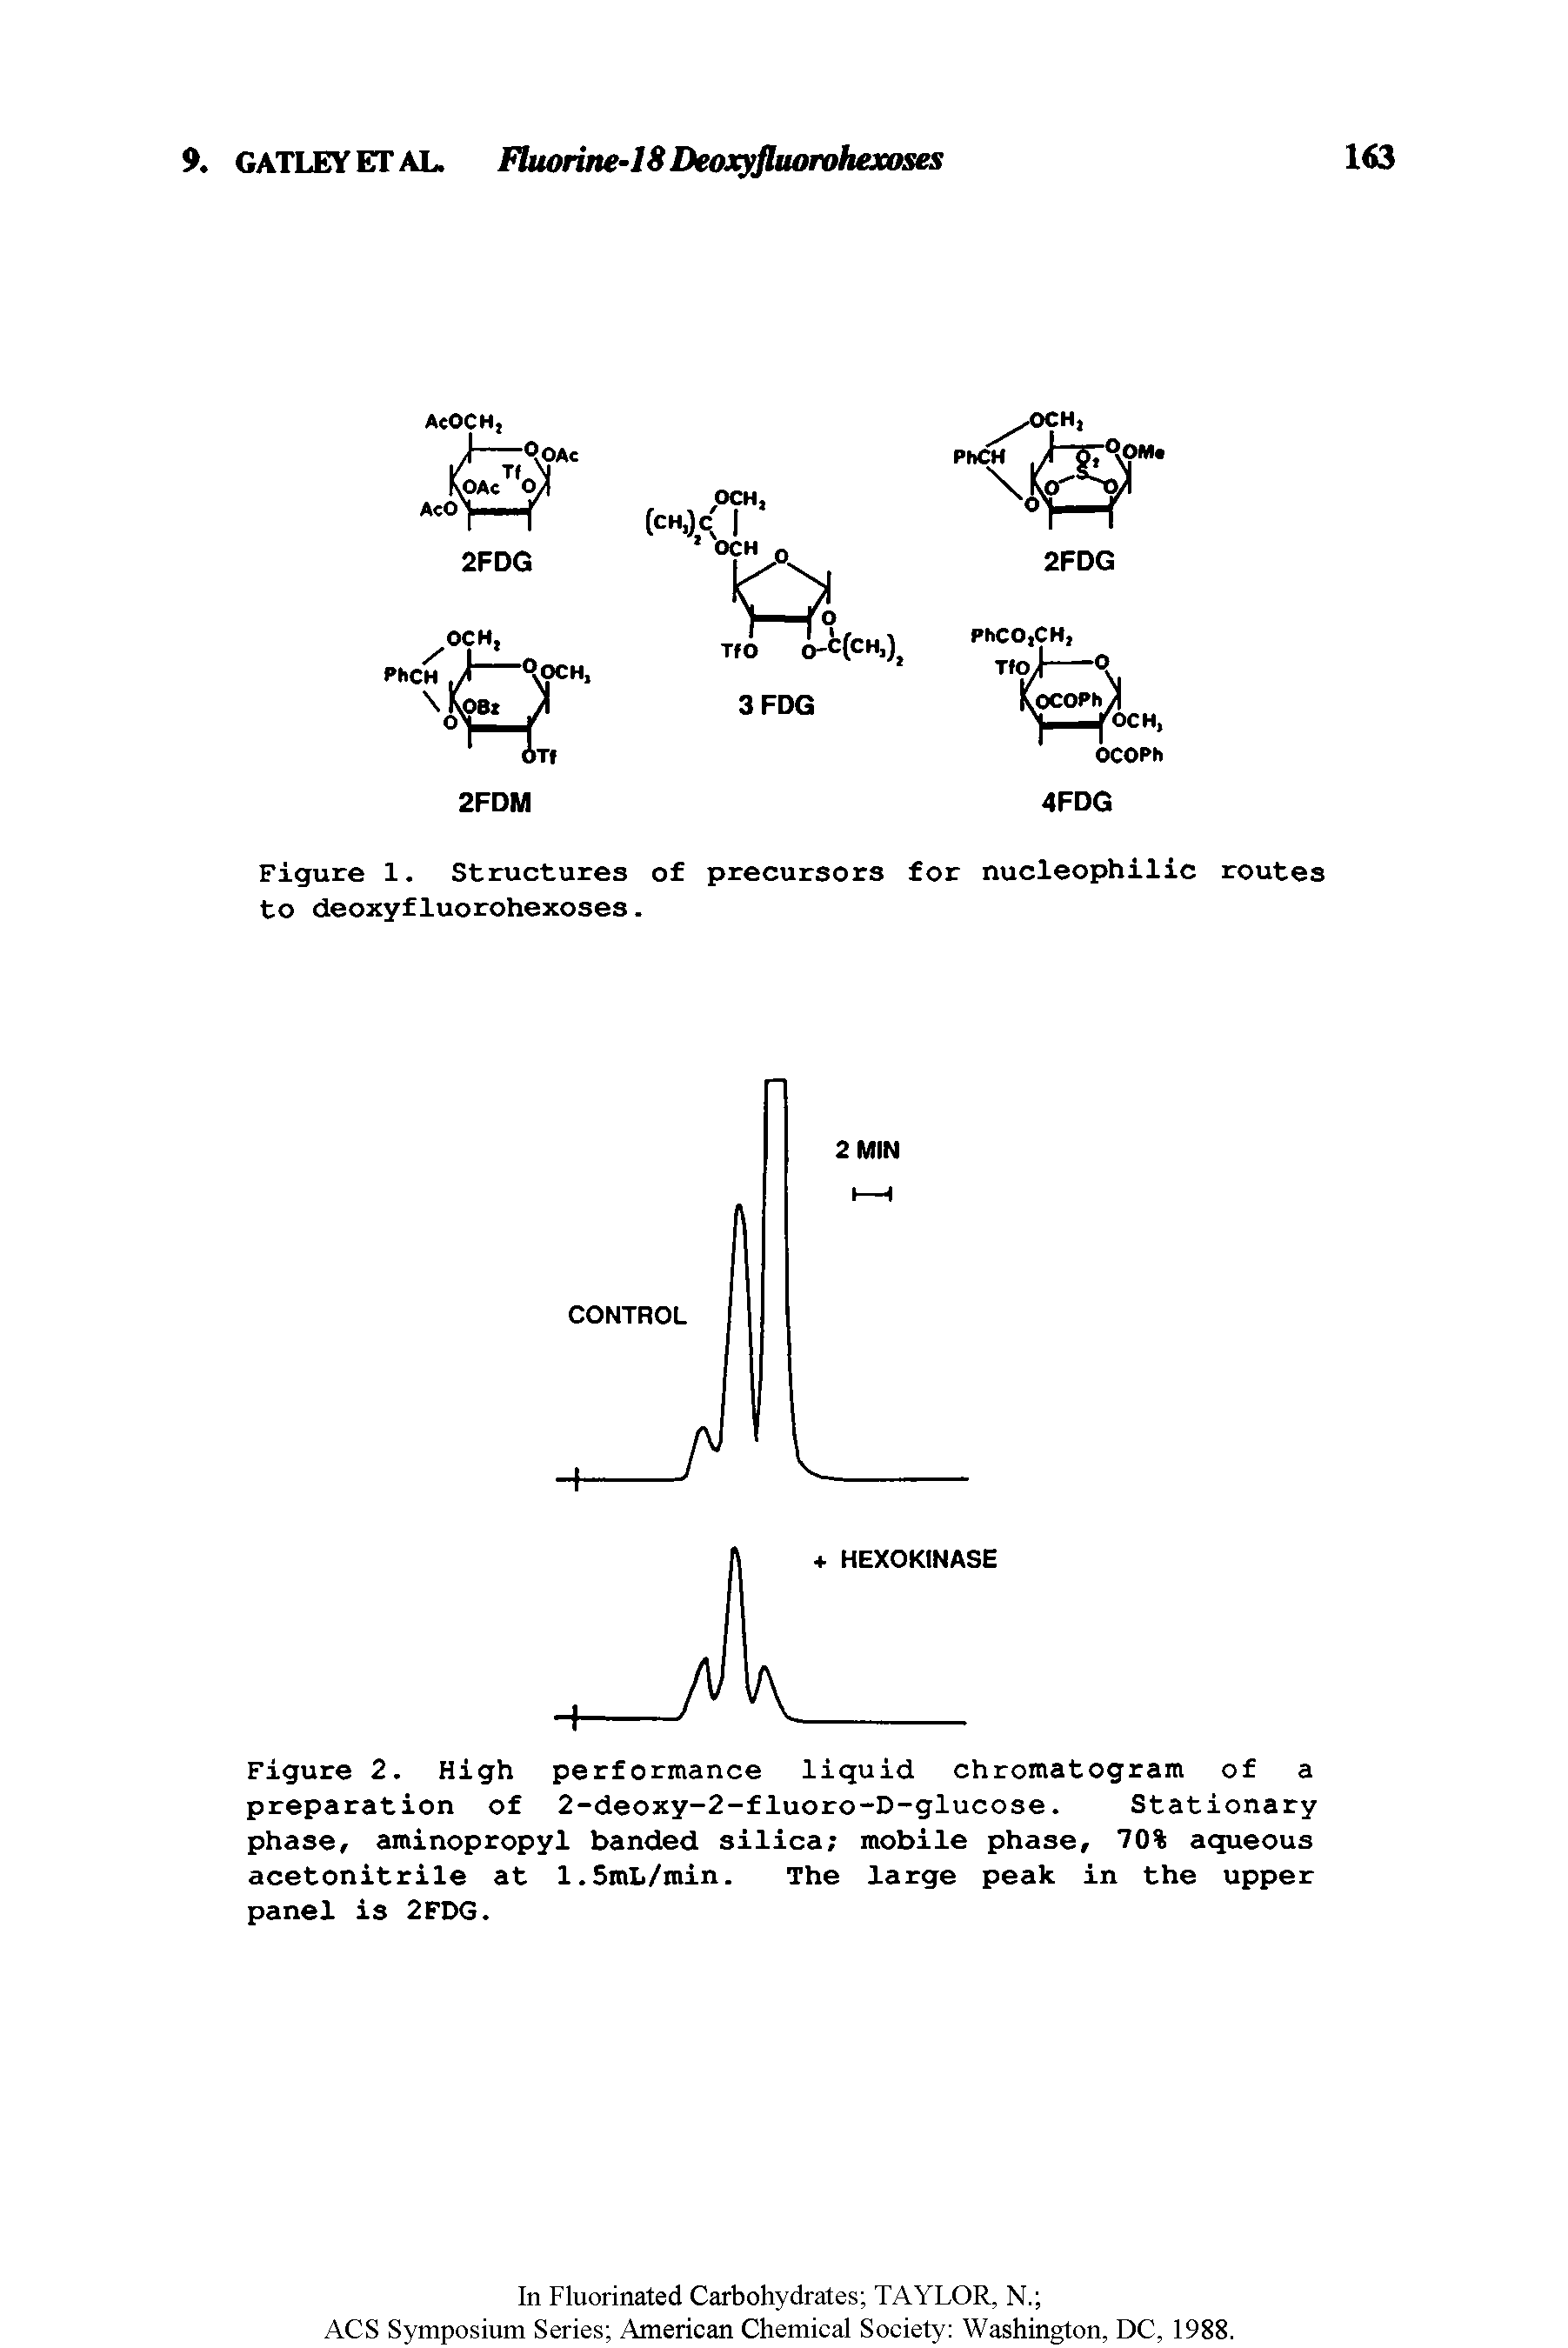 Figure 2. High performance liquid chromatogram of a preparation of 2-deoxy-2-fluoro-D-glucose. Stationary phase, aminopropyl banded silica mobile phase, 70% aqueous acetonitrile at l.SmL/min. The large peak in the upper panel is 2FDG.